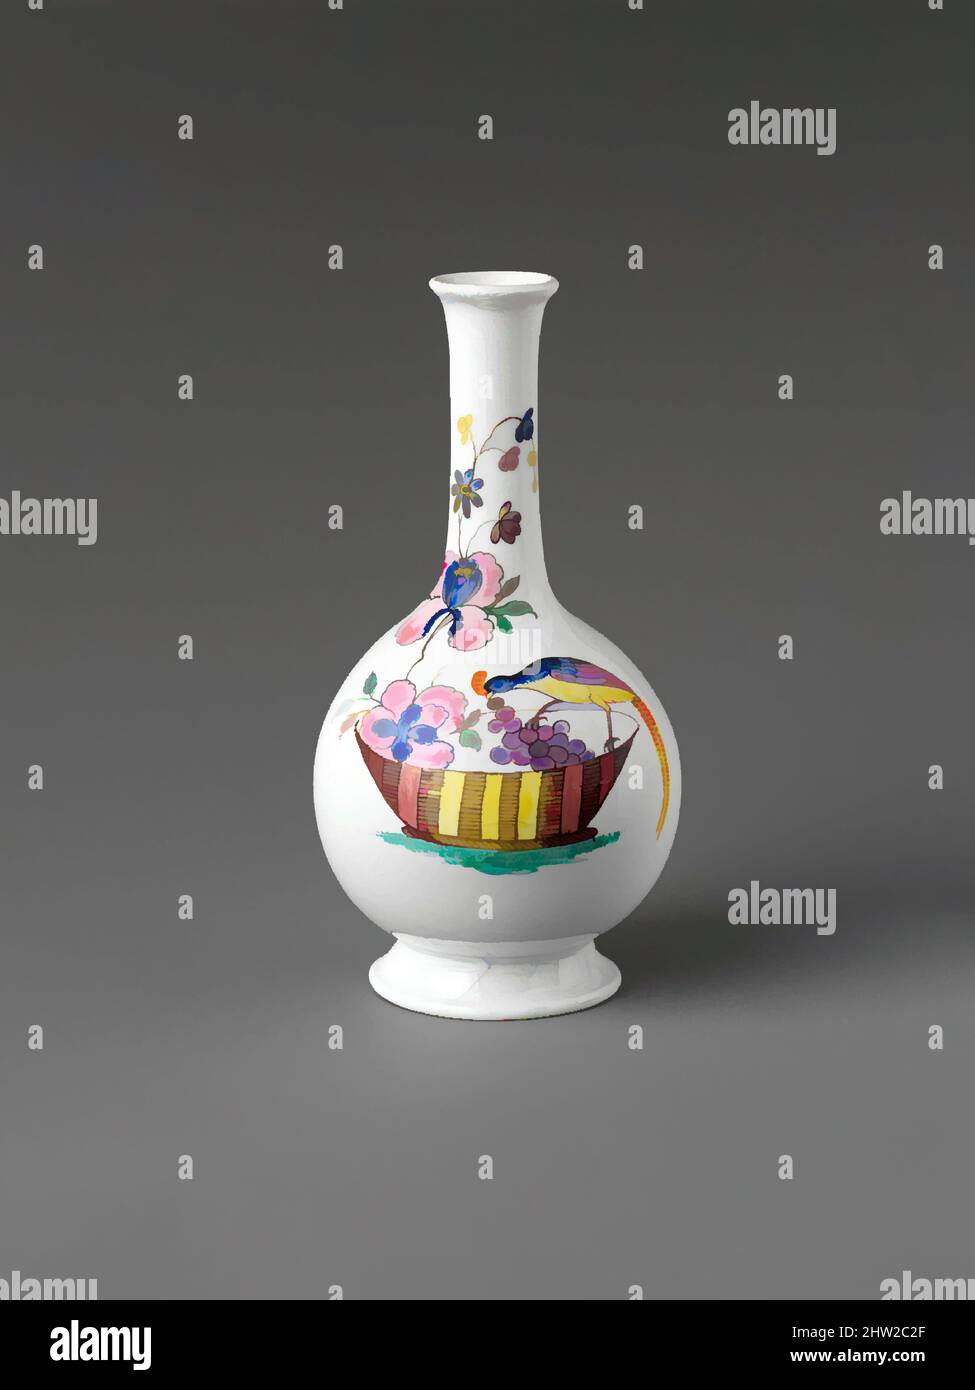 Art inspired by Bottle, 18th century, Probably made in Bristol, Bristol, England, British, Painted glass, H. 5 in. (12.7 cm), Glass, Classic works modernized by Artotop with a splash of modernity. Shapes, color and value, eye-catching visual impact on art. Emotions through freedom of artworks in a contemporary way. A timeless message pursuing a wildly creative new direction. Artists turning to the digital medium and creating the Artotop NFT Stock Photo